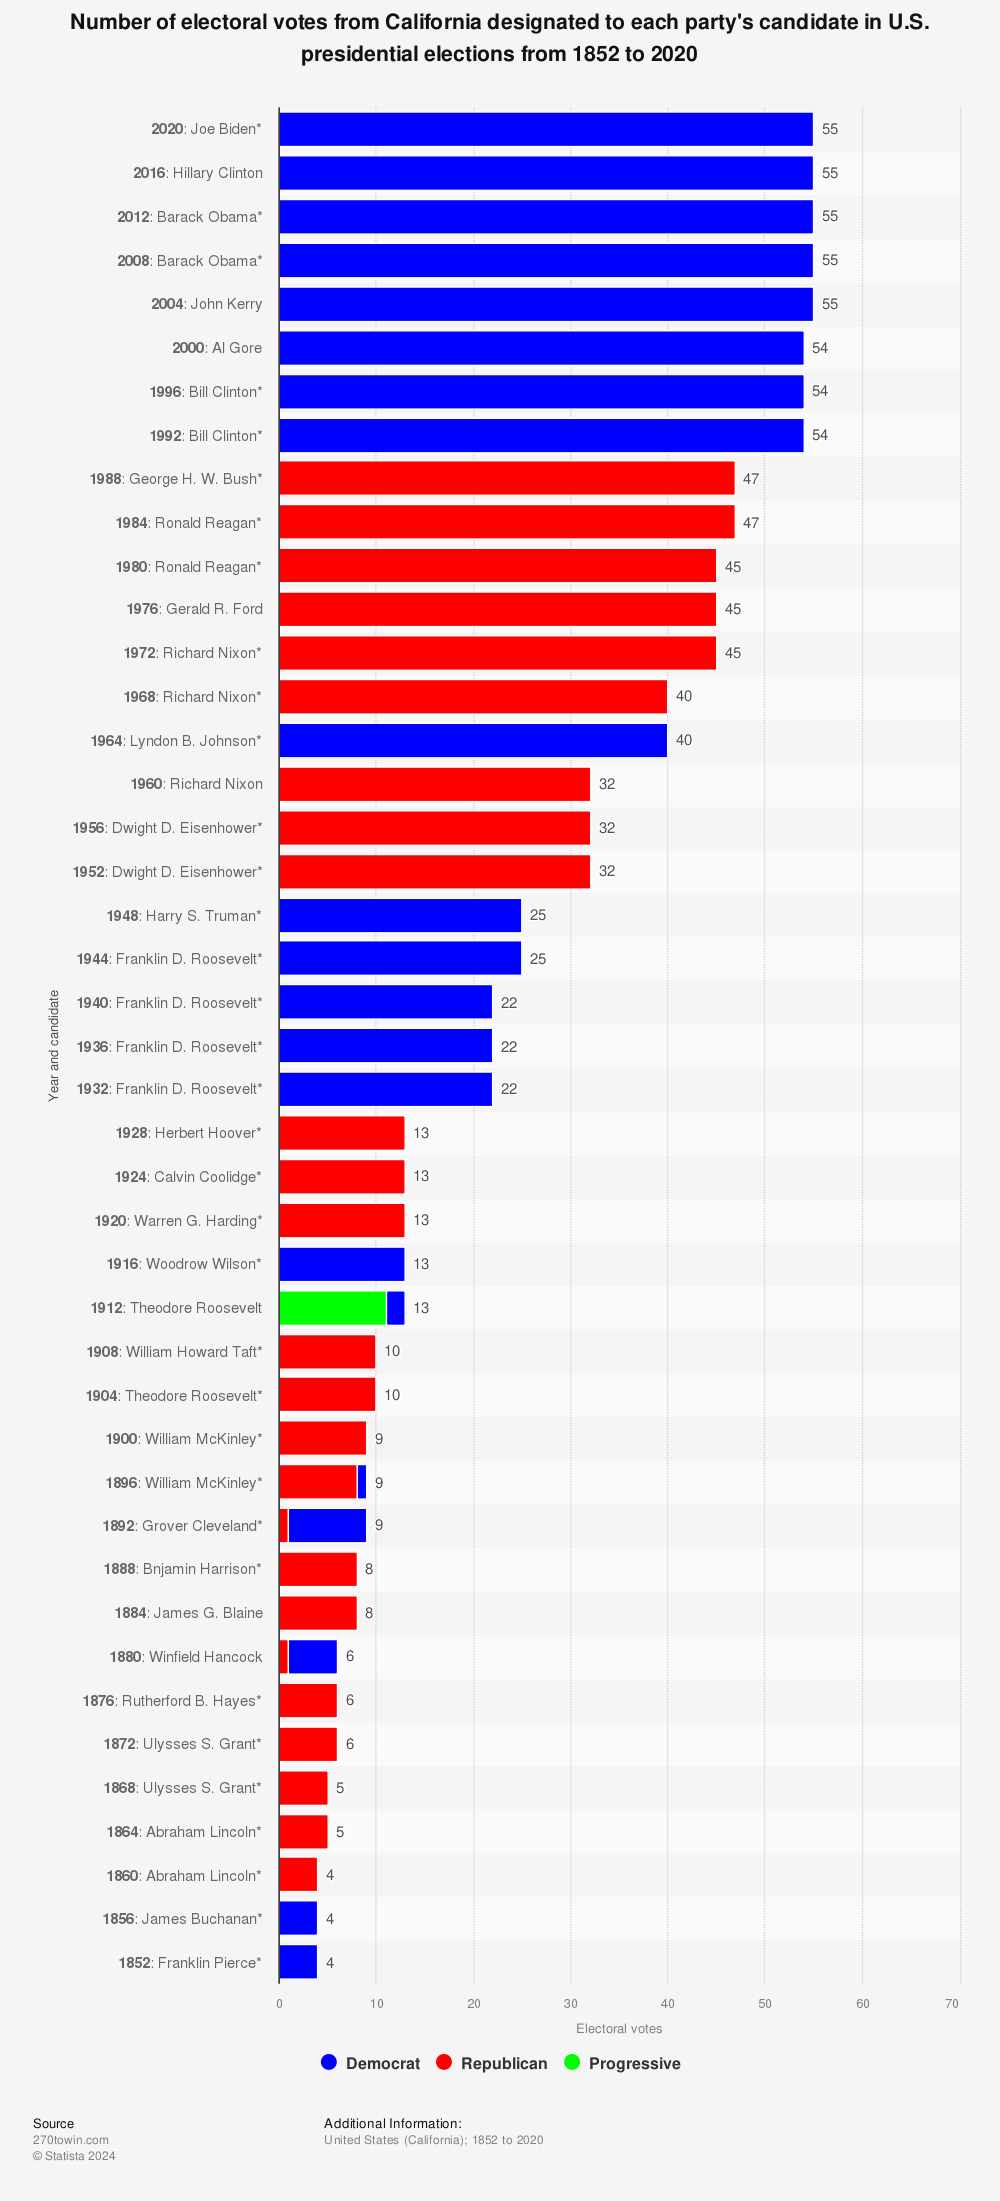 Statistic: Number of electoral votes from California designated to each party's candidate in U.S. presidential elections from 1852 to 2020 | Statista